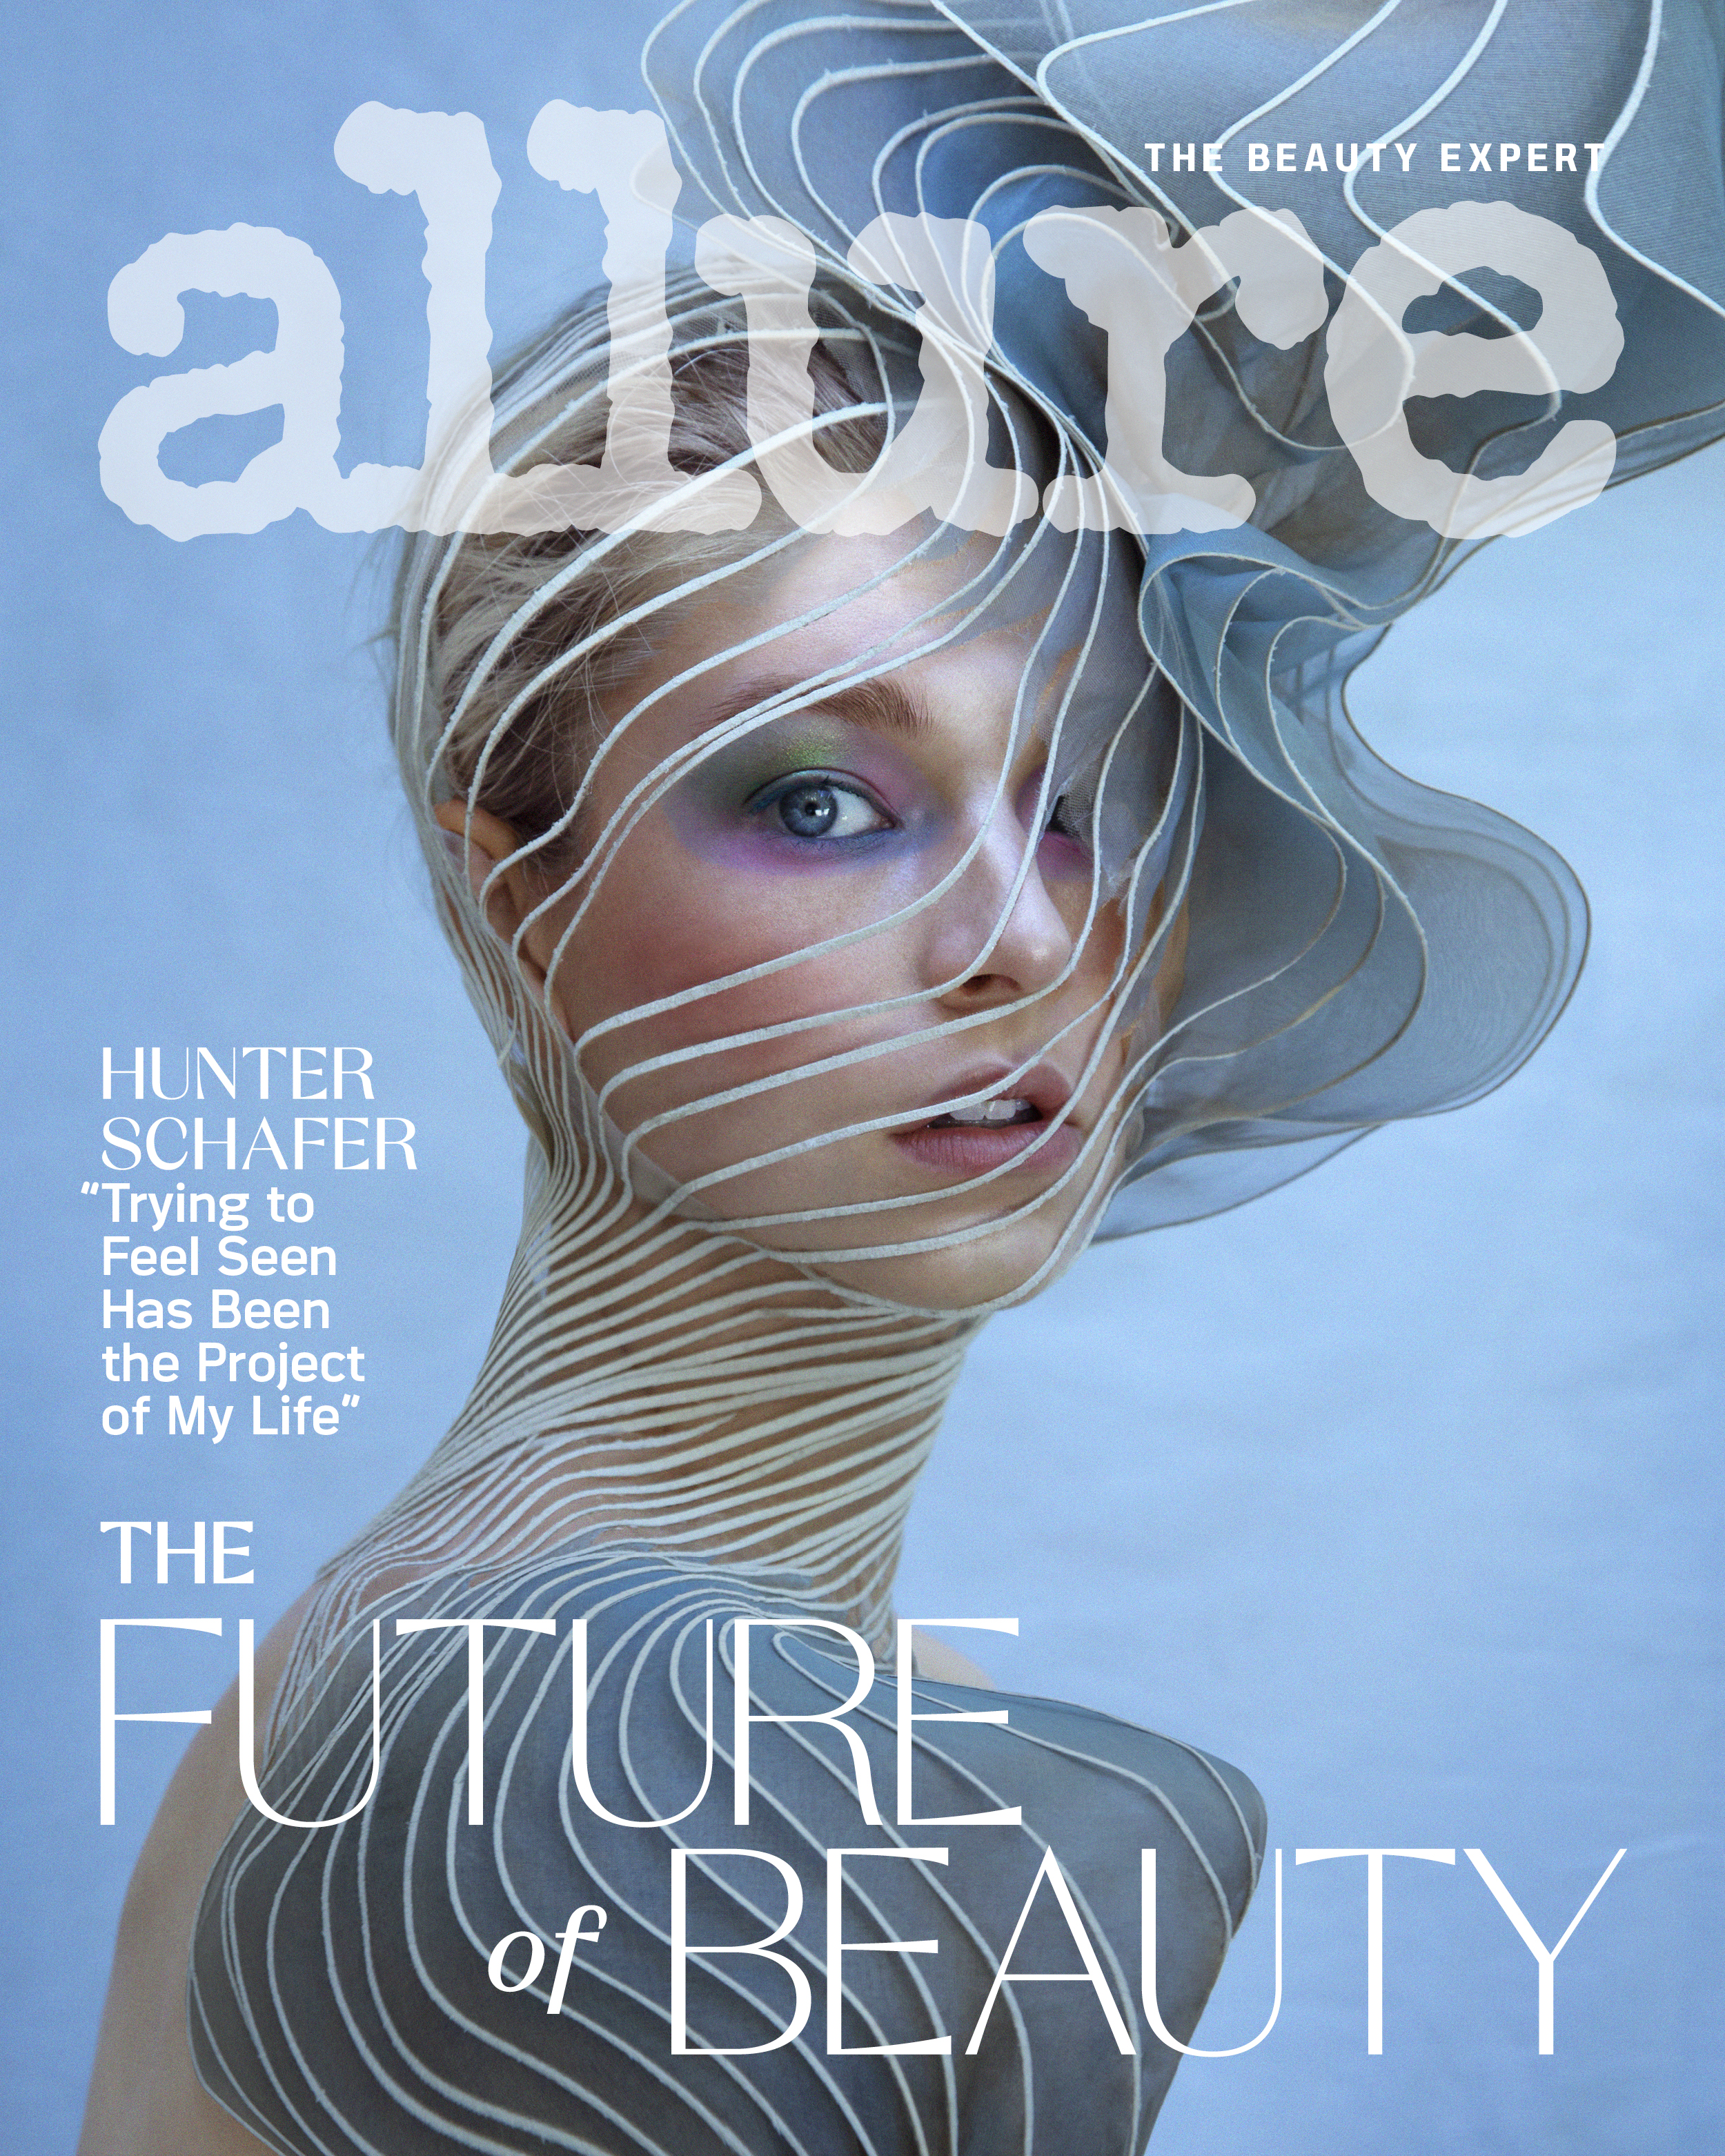 Allure - Best Fashion and Beauty Cover